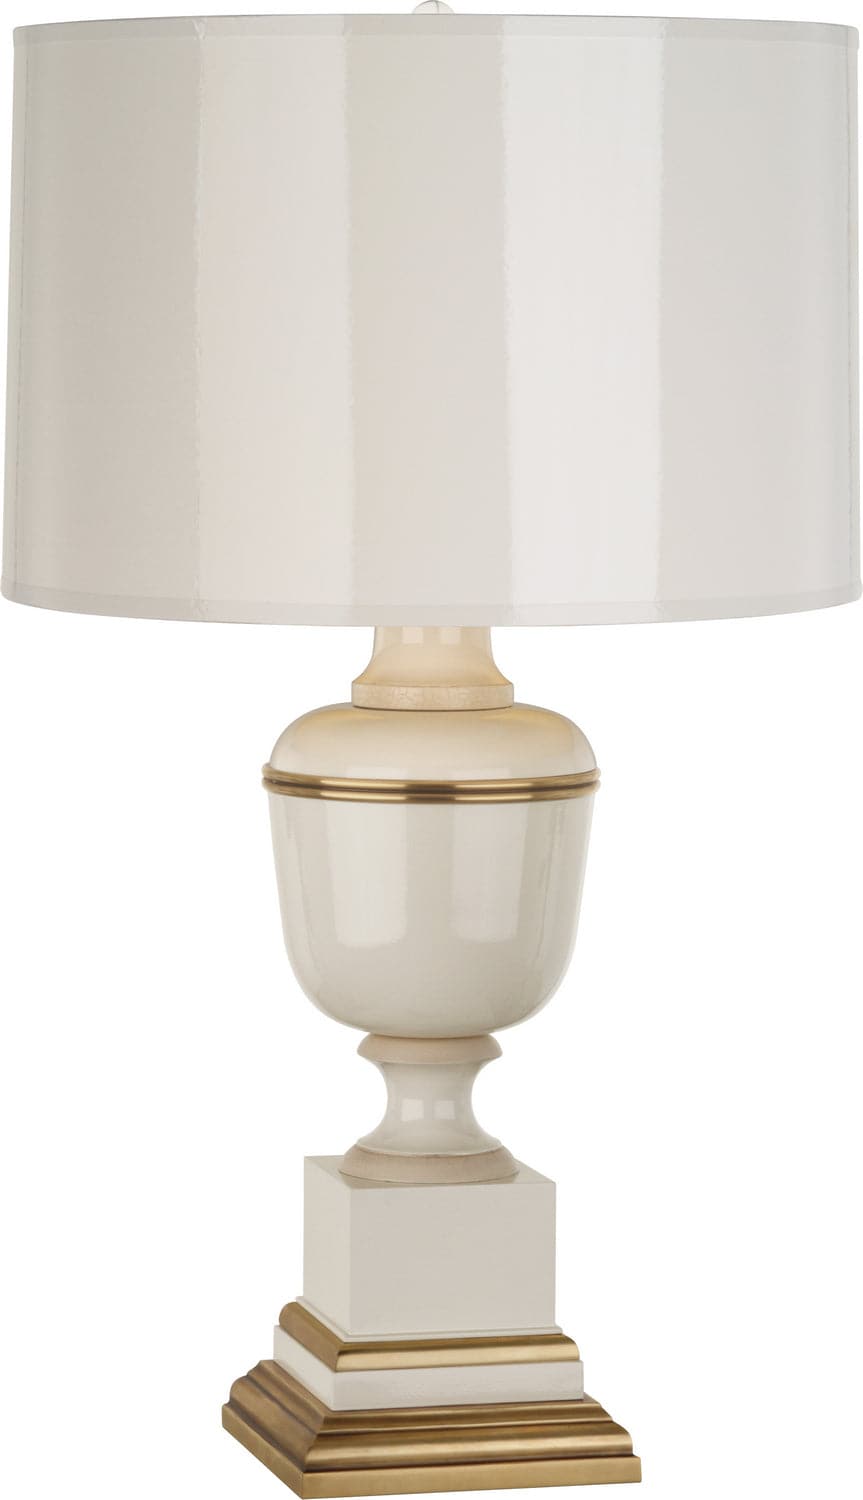 Robert Abbey - 2604 - One Light Accent Lamp - Annika - Ivory Lacquered Paint w/Natural Brass and Ivory Crackle